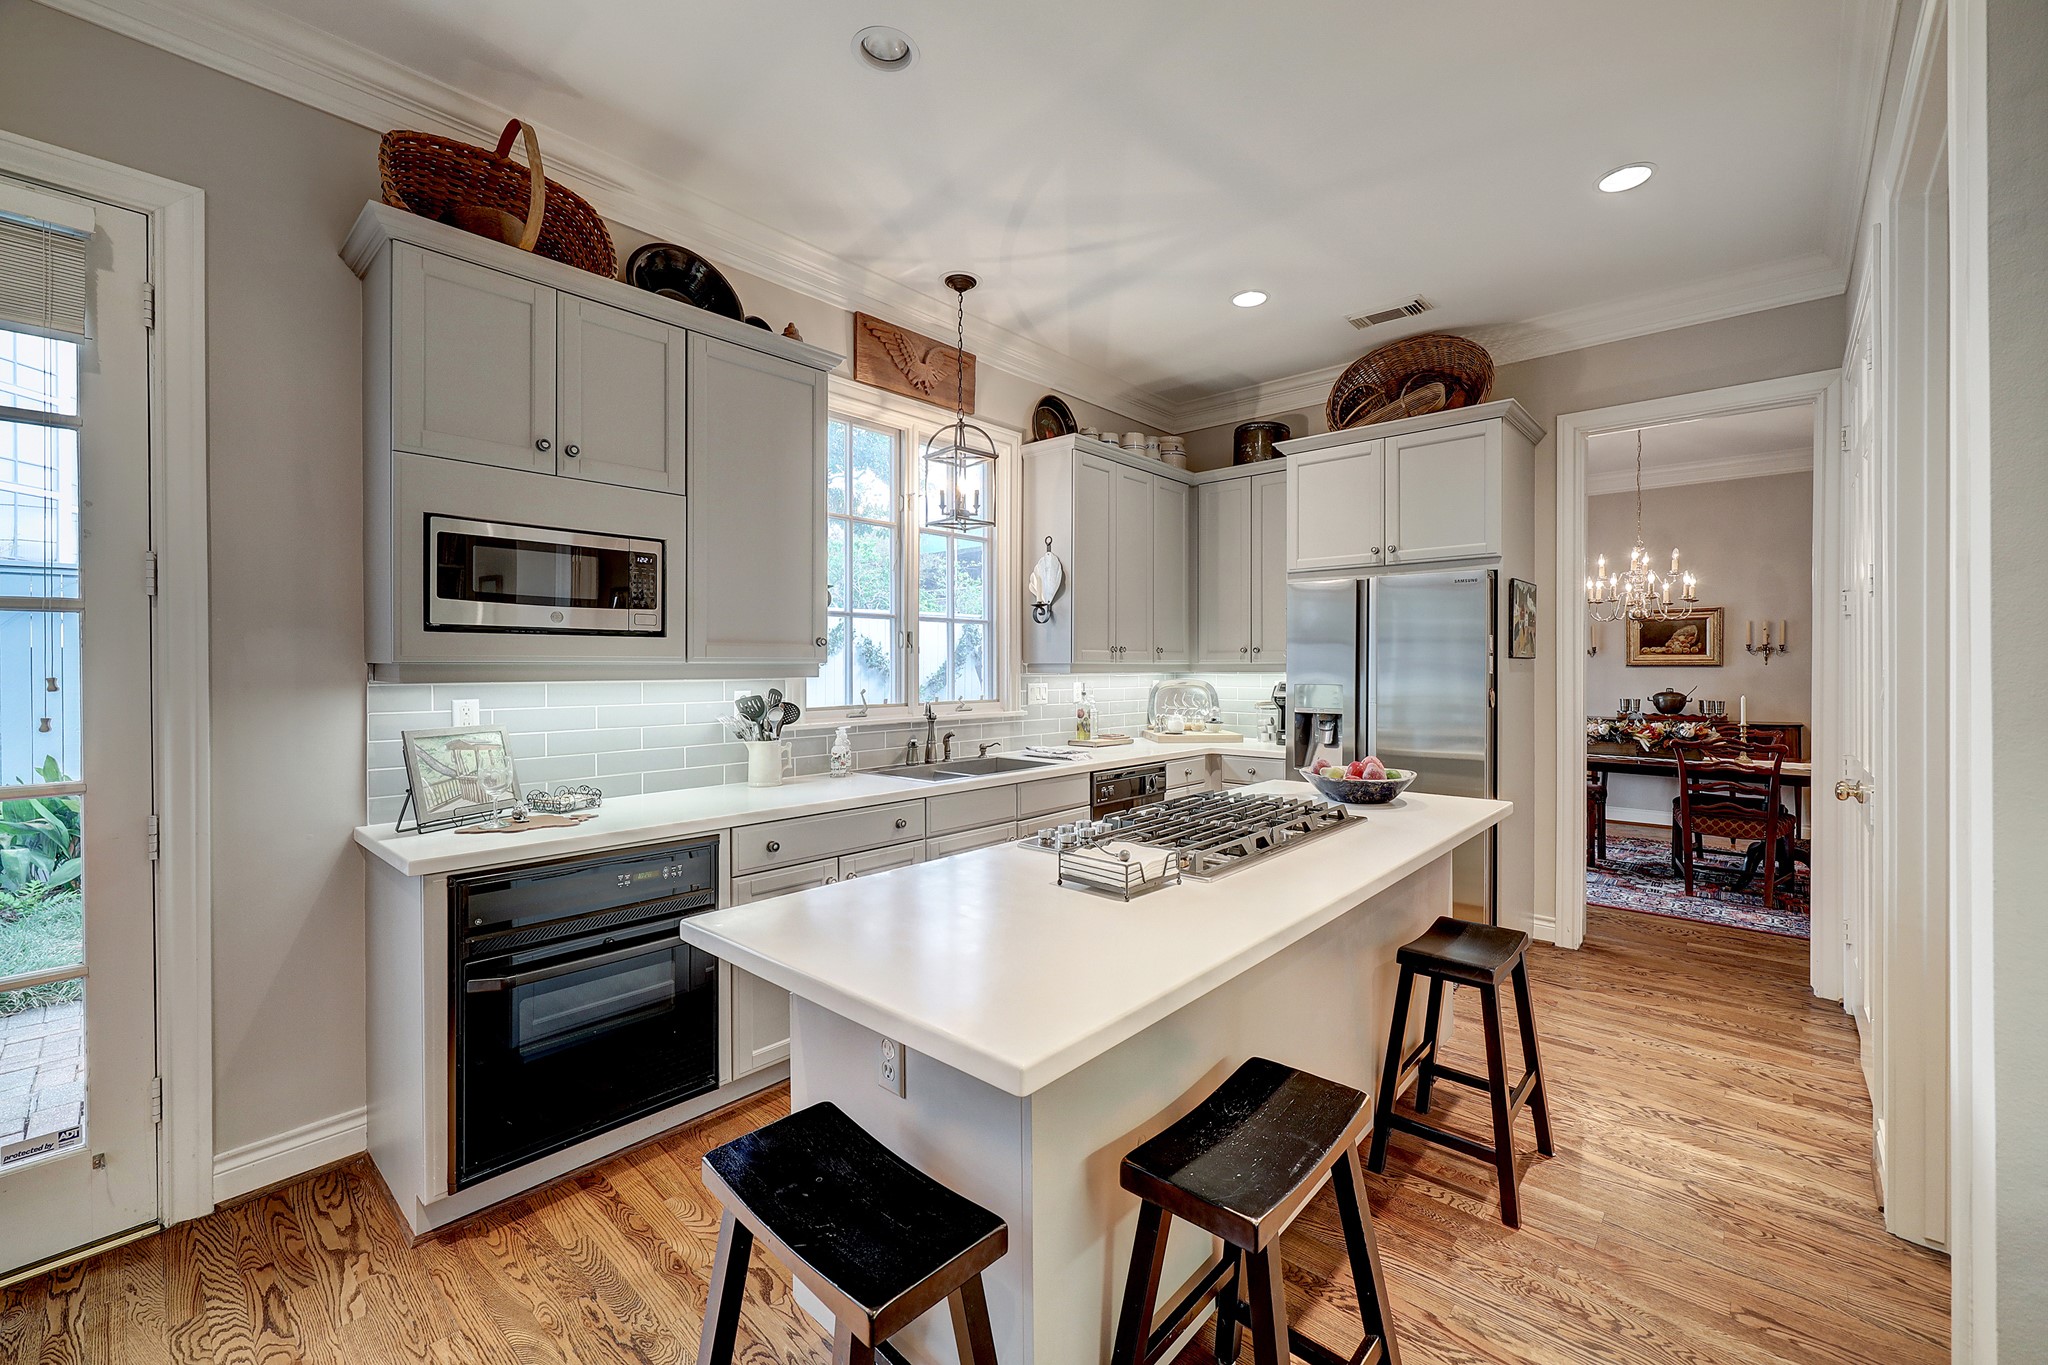 The kitchen island allows ample seating and prep space.